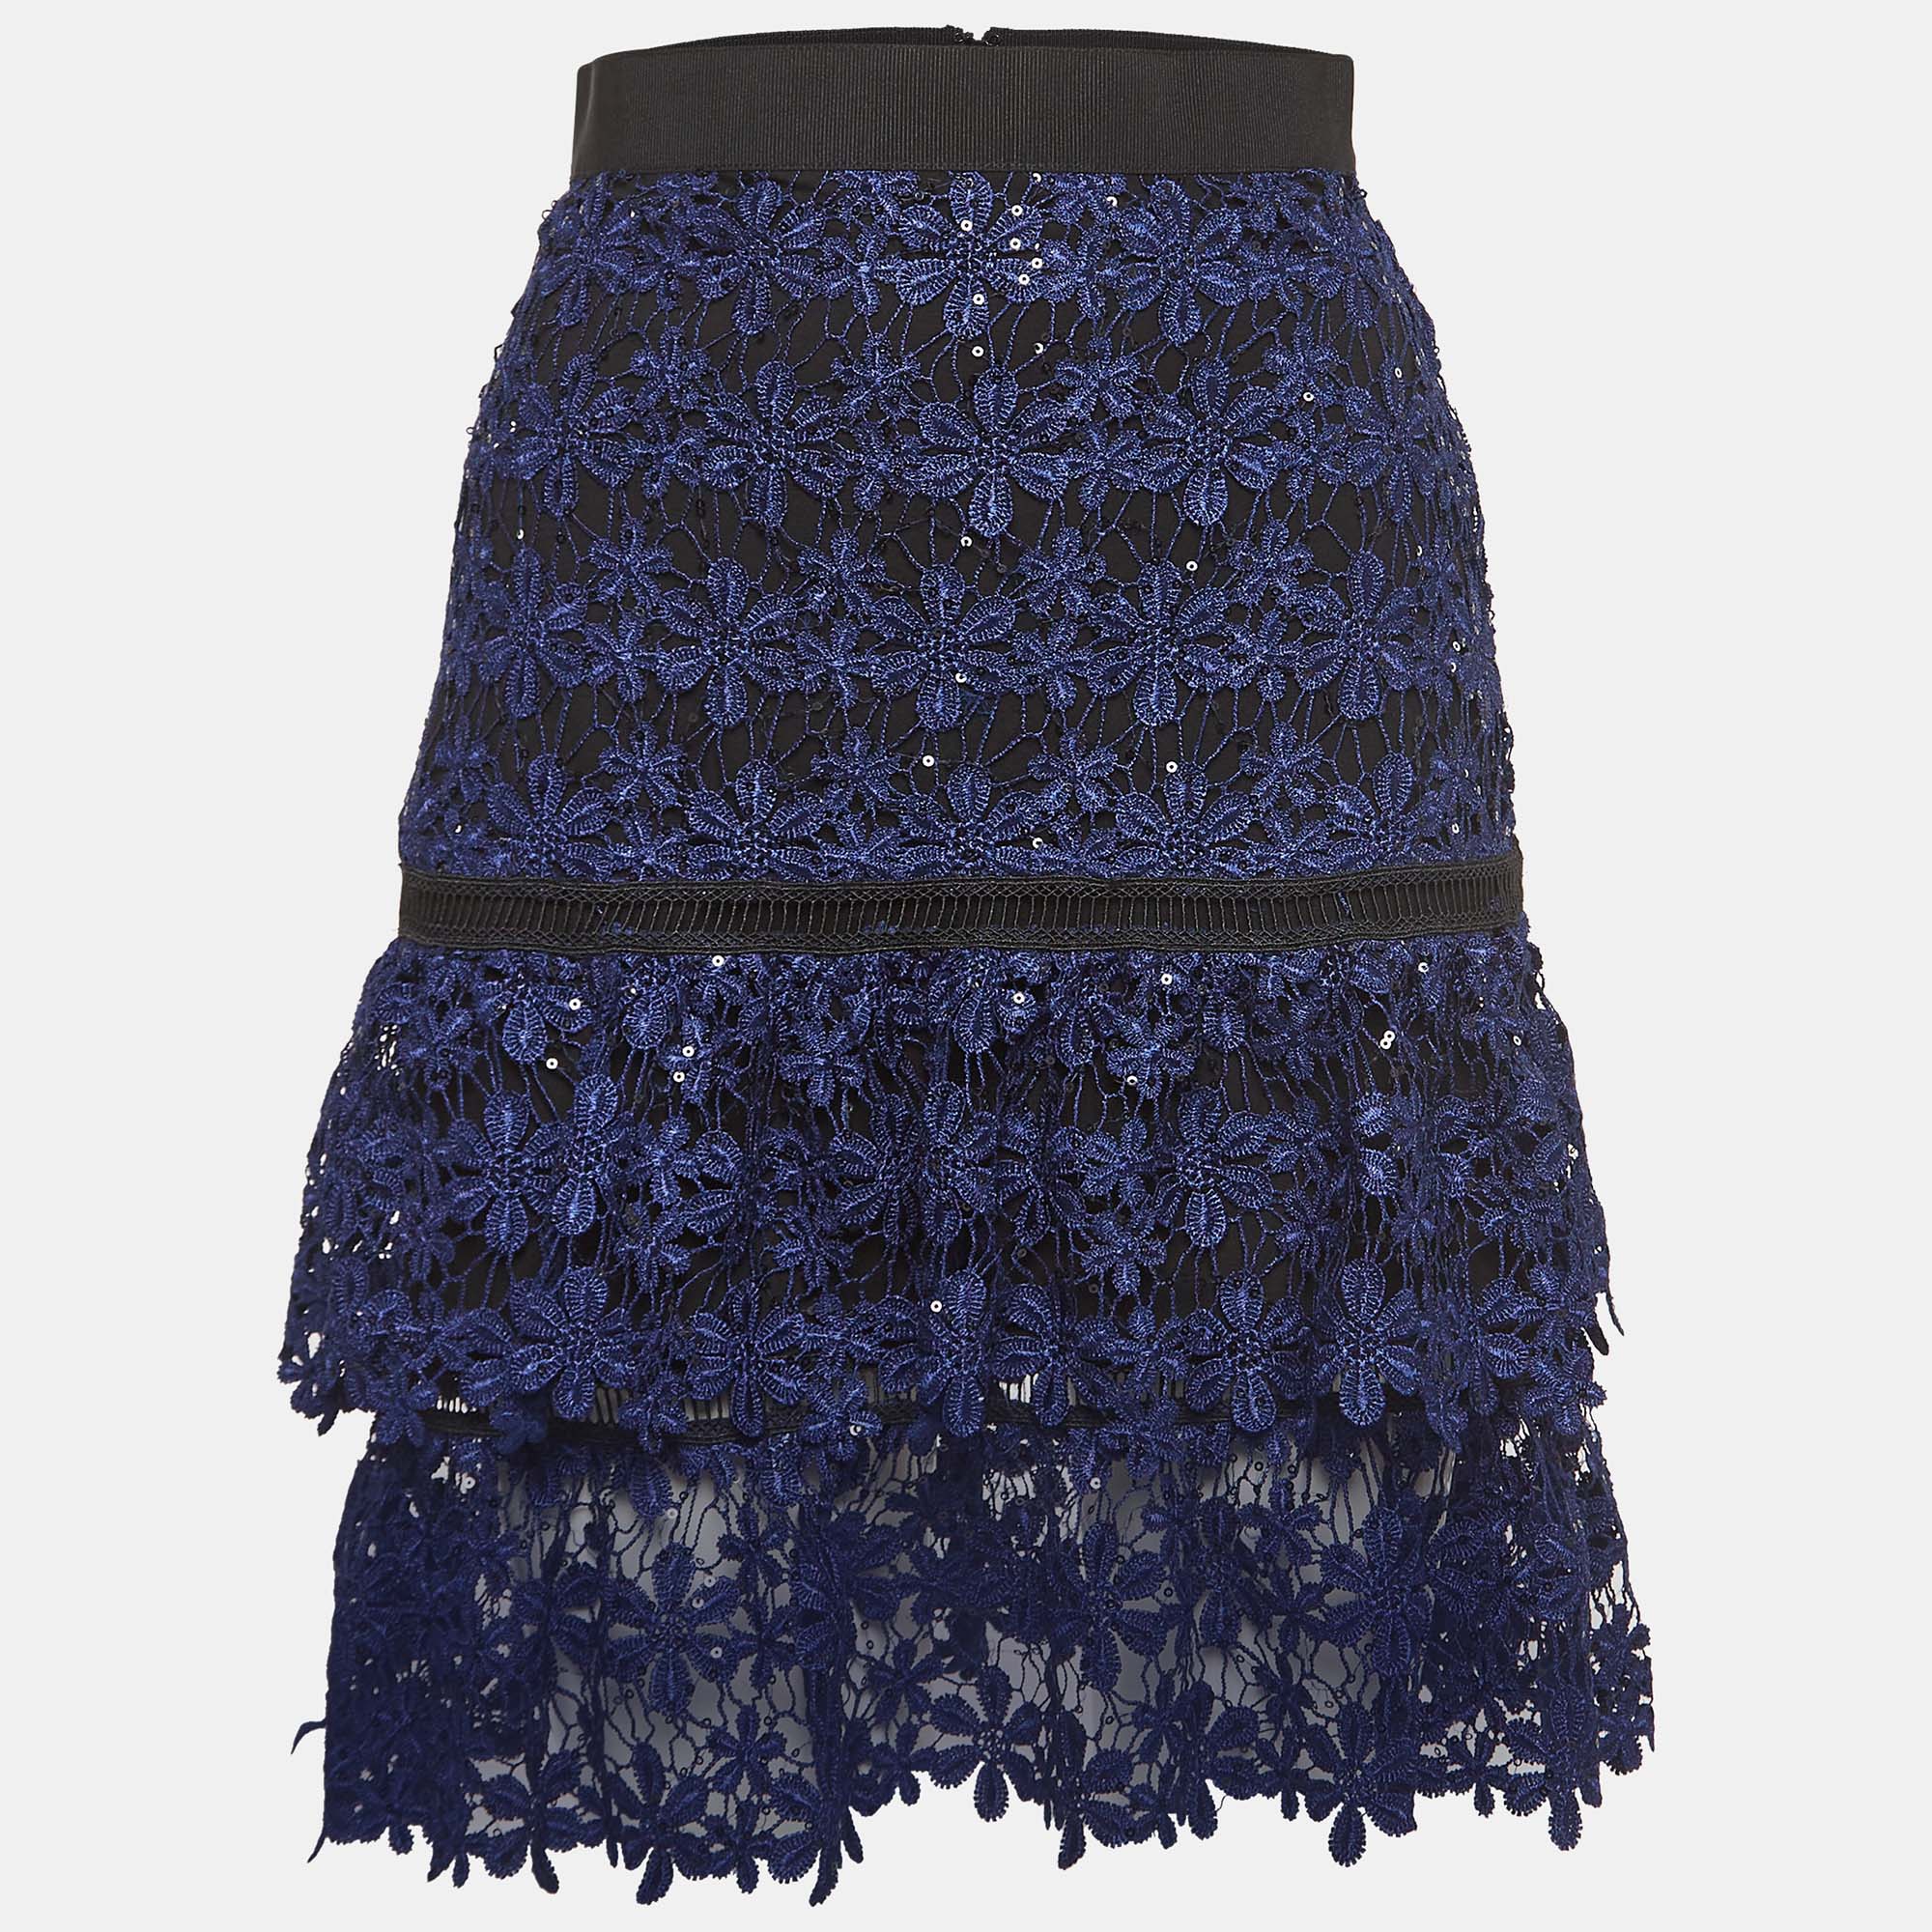 Self-portrait blue floral guipure lace sequin embellished tiered skirt s